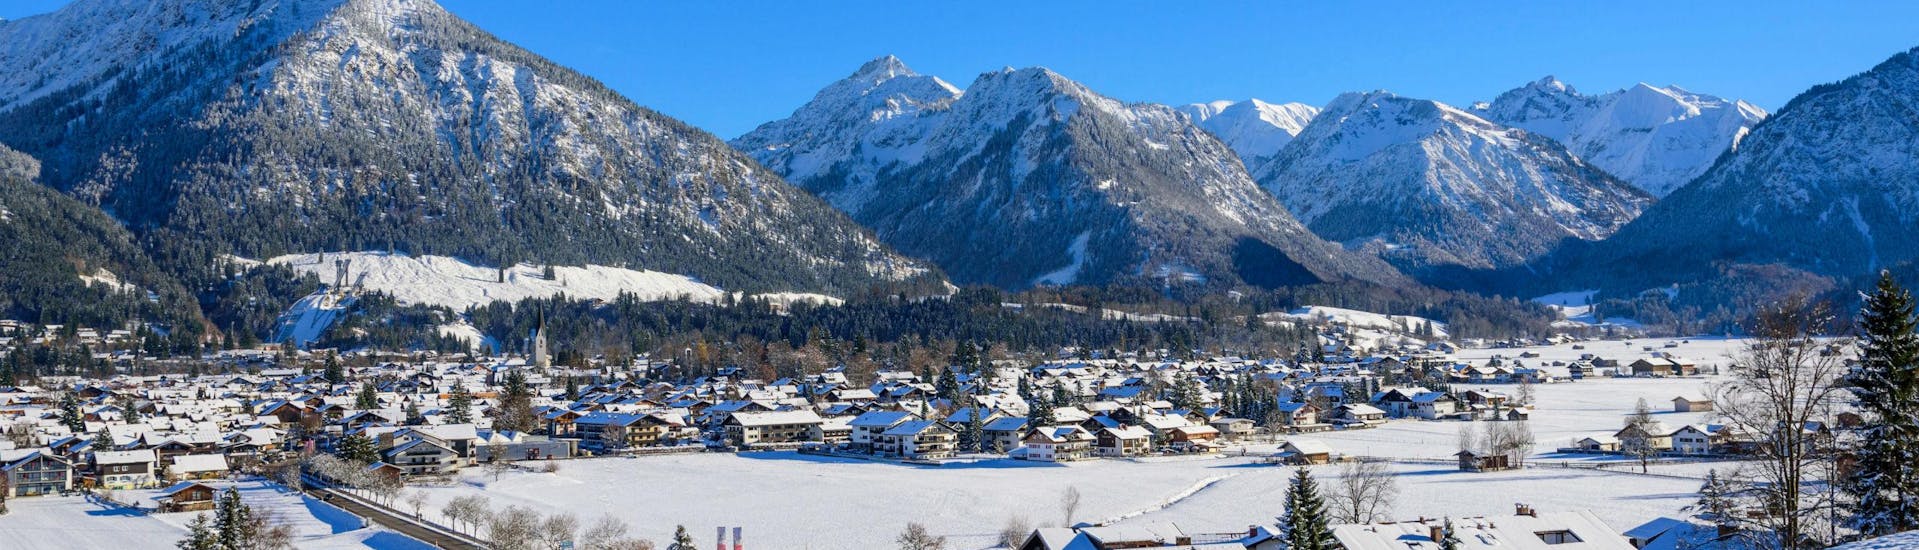 A view of the Fellhorn/Kanzelwand near Oberstdorf, a popular ski resort nestled between the Bavarian mountains, where local ski schools offer a range of different types of ski lessons. 